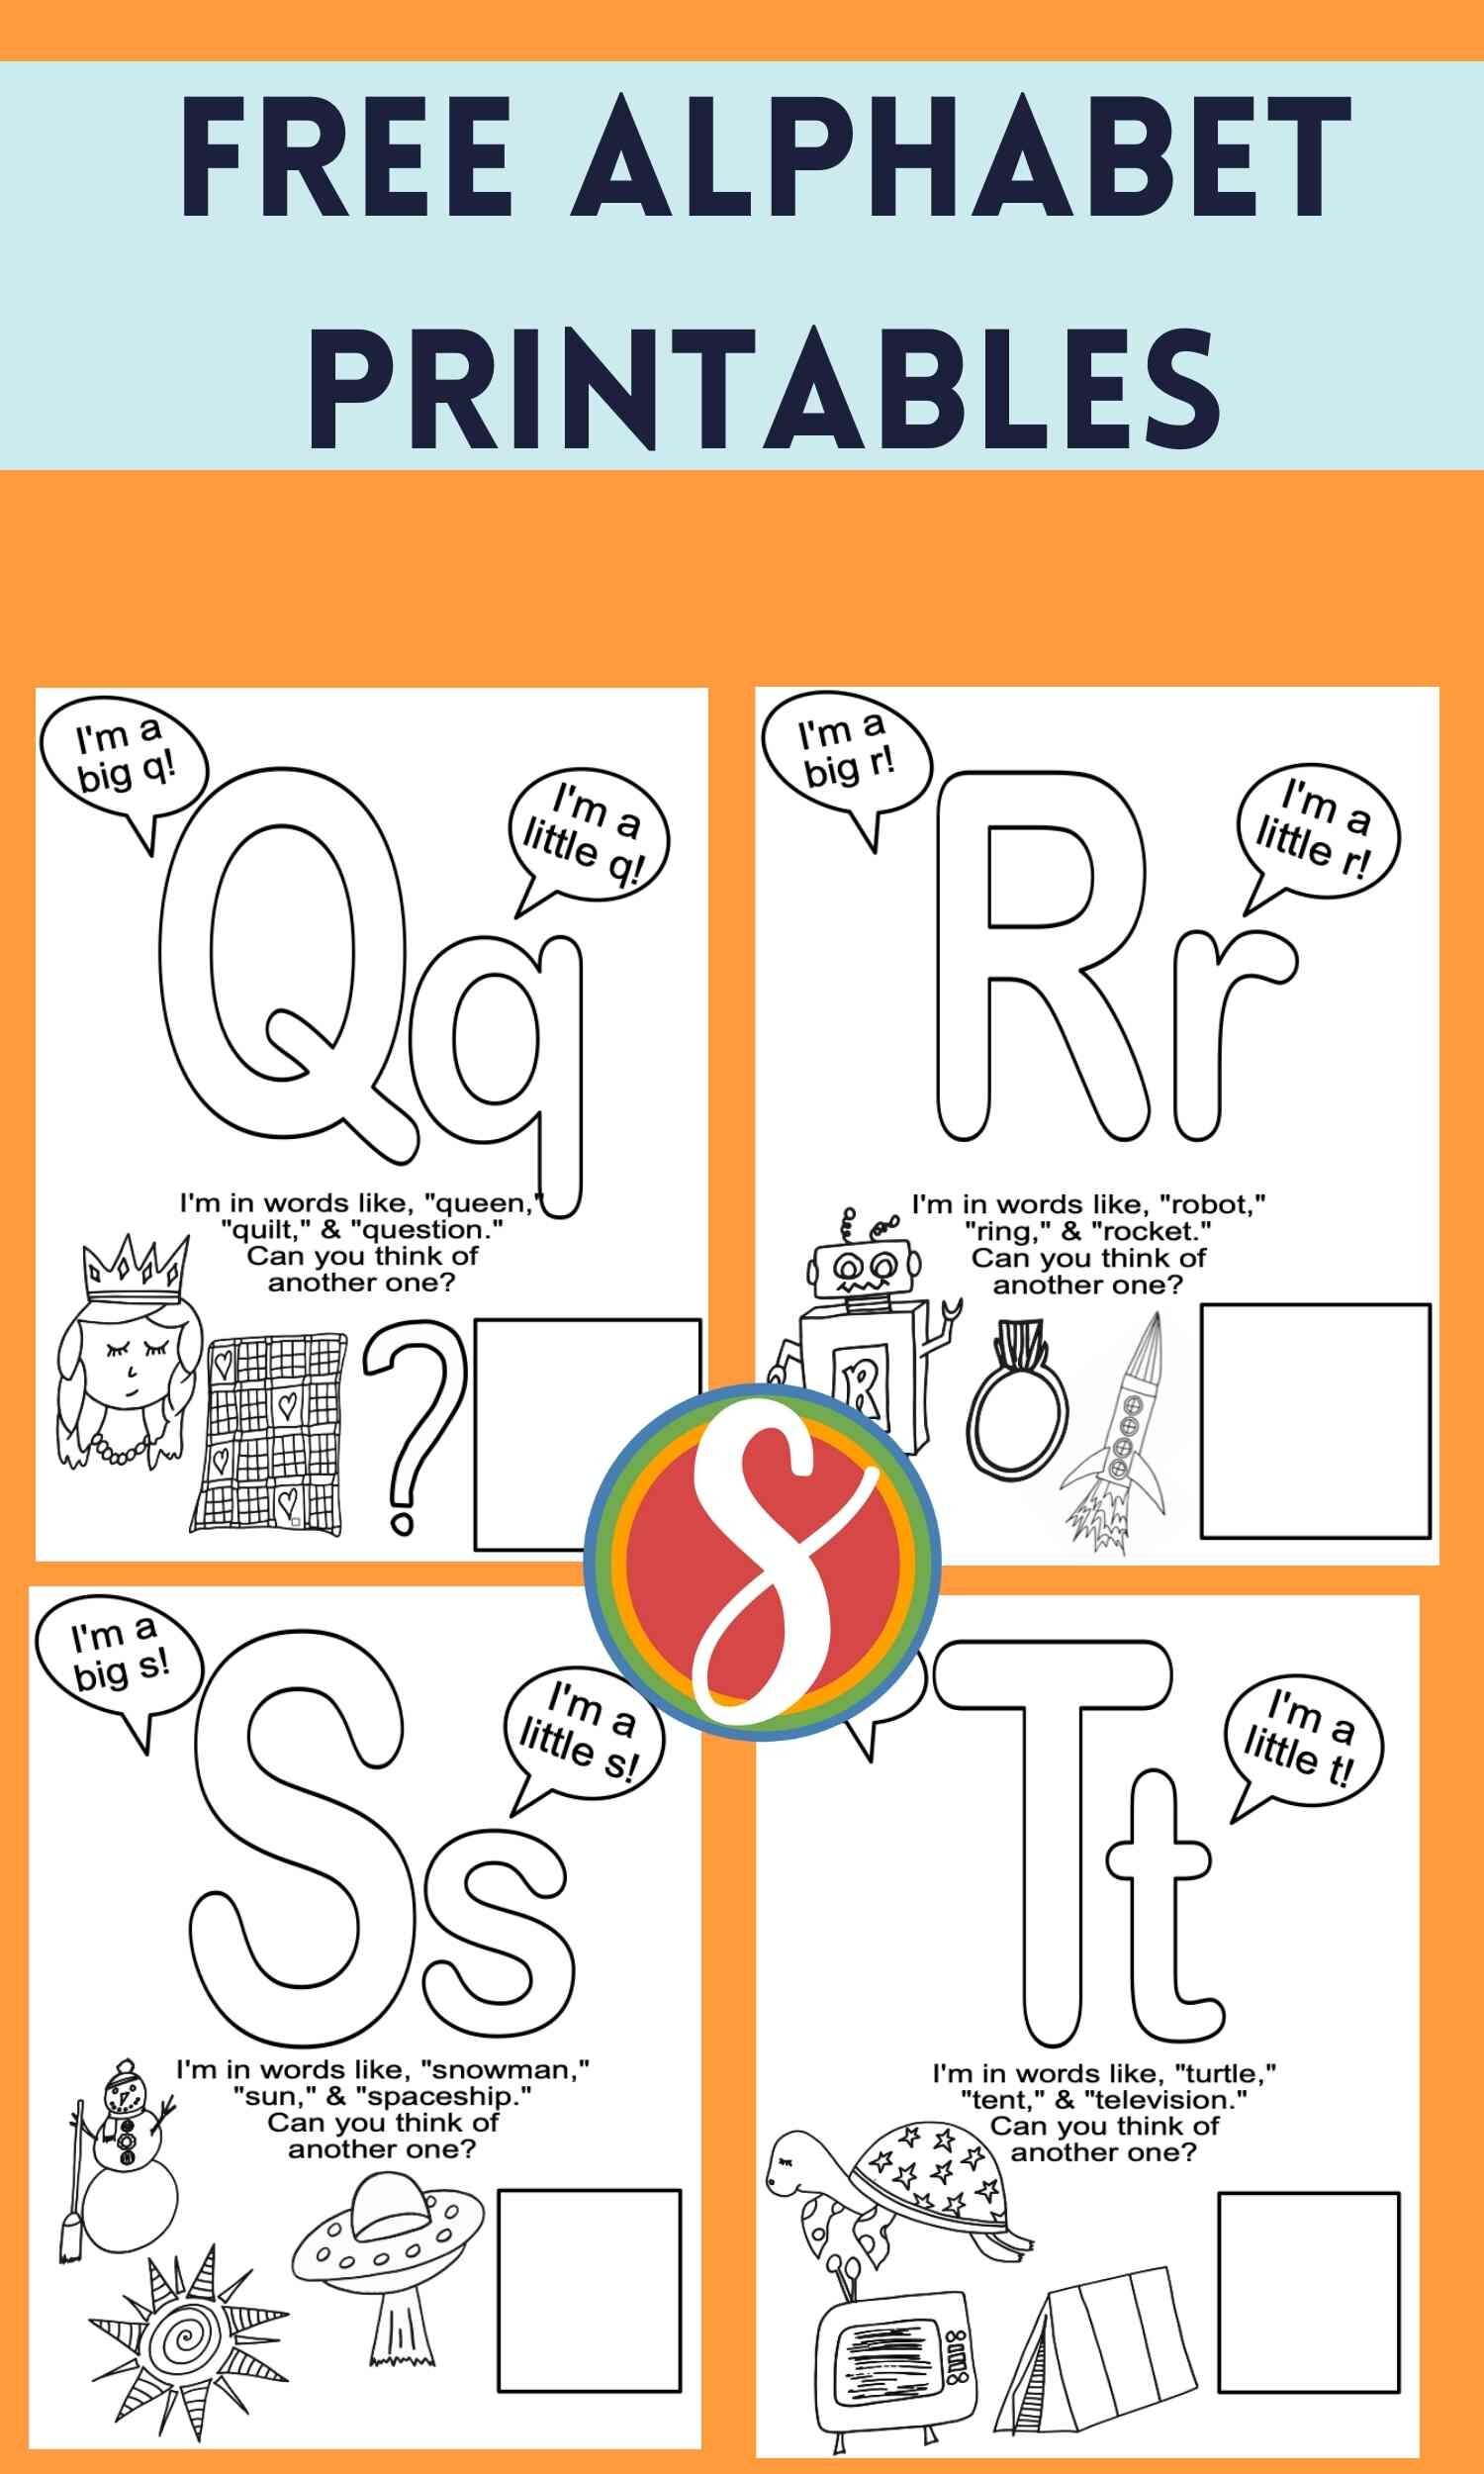 26 free letters activity pages all about the alphabet - get all 26 alphabet coloring pages in this one post - free to print and color from Stevie Doodles